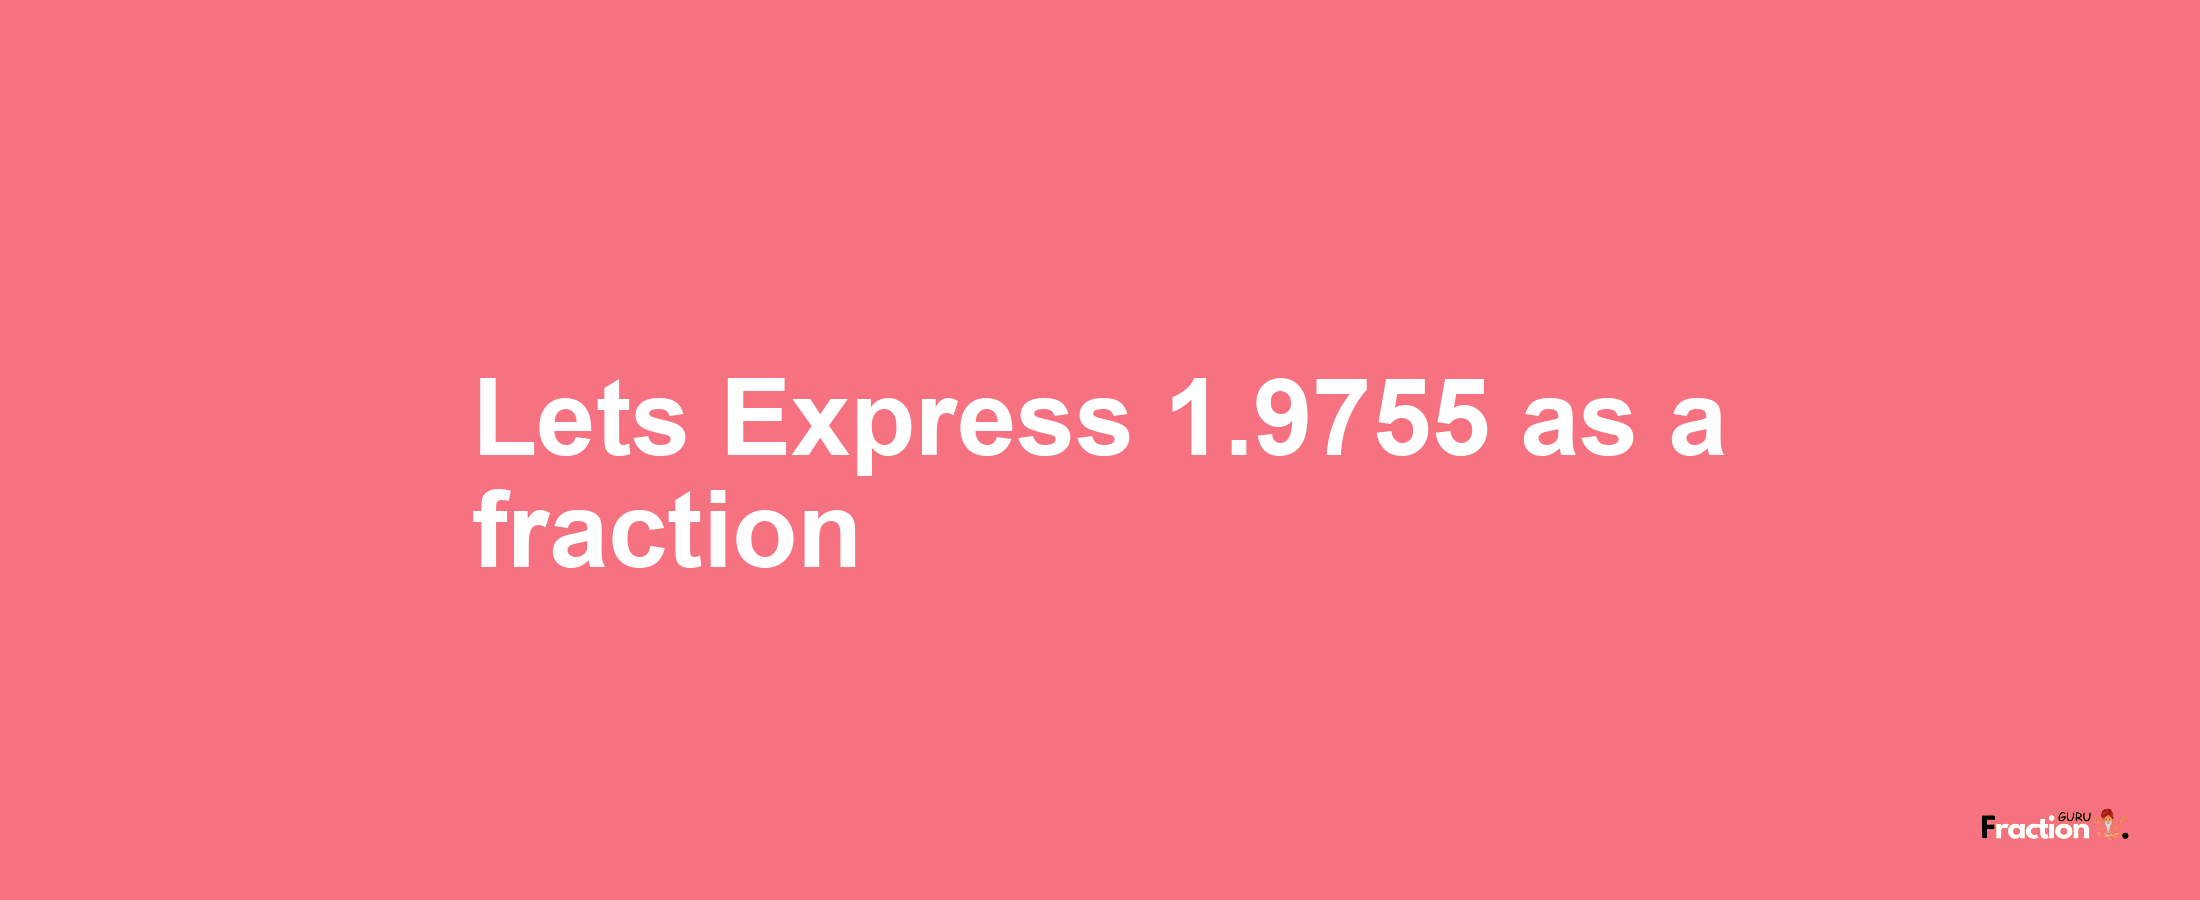 Lets Express 1.9755 as afraction